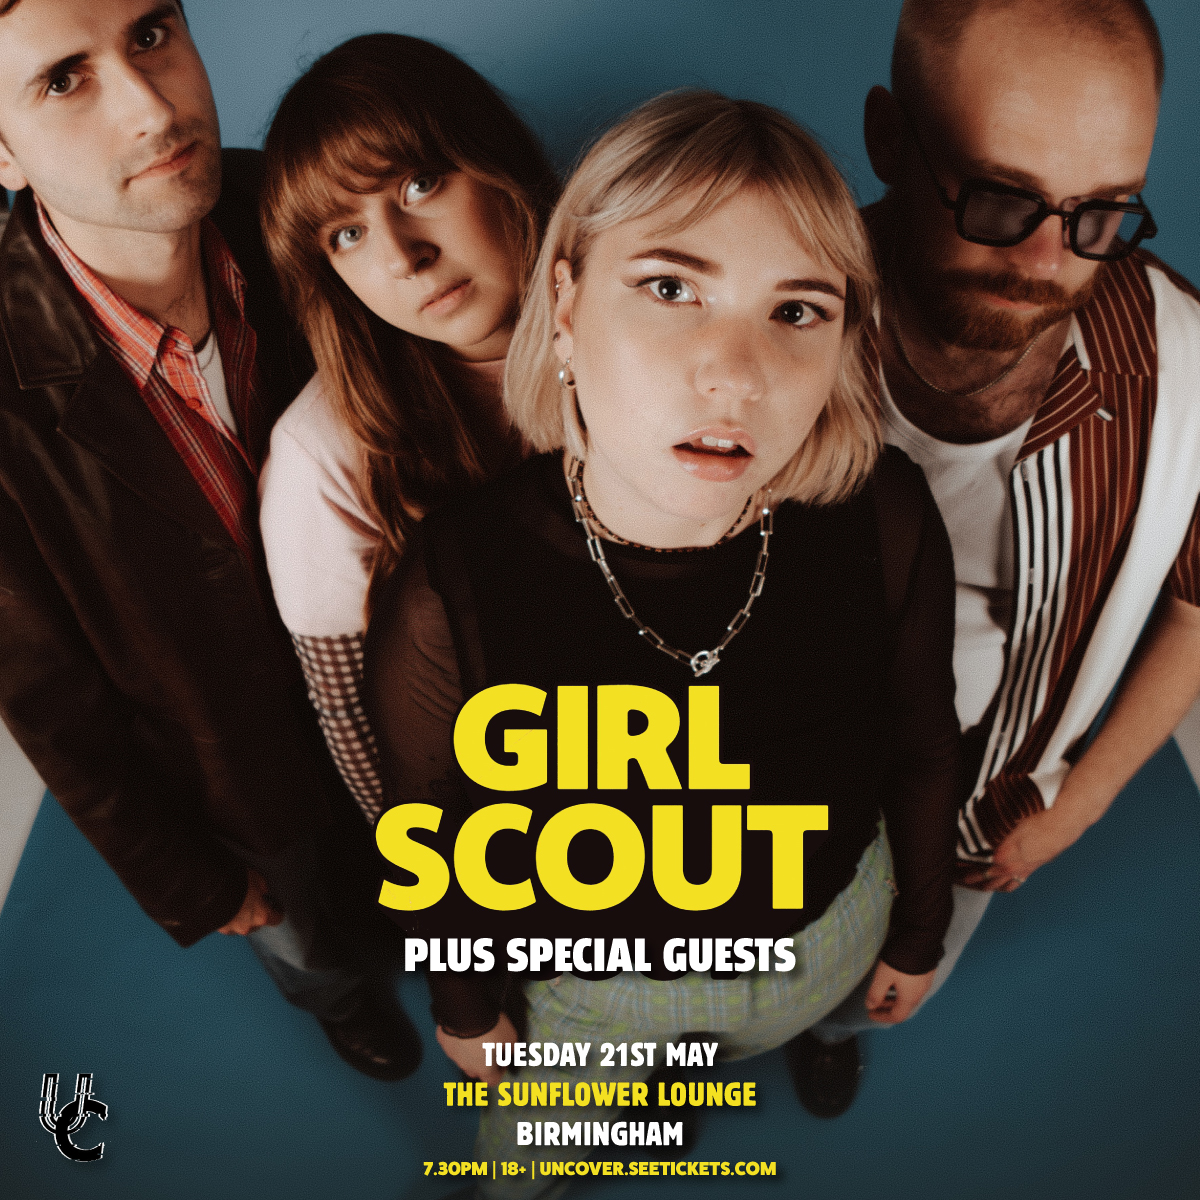 ONE MONTH TO GO 💙 Swedish four-piece Girl Scout headline The @Sunflowerlounge on Tuesday, 21st May 💥 Tickets on sale now: bit.ly/3ts6VtG